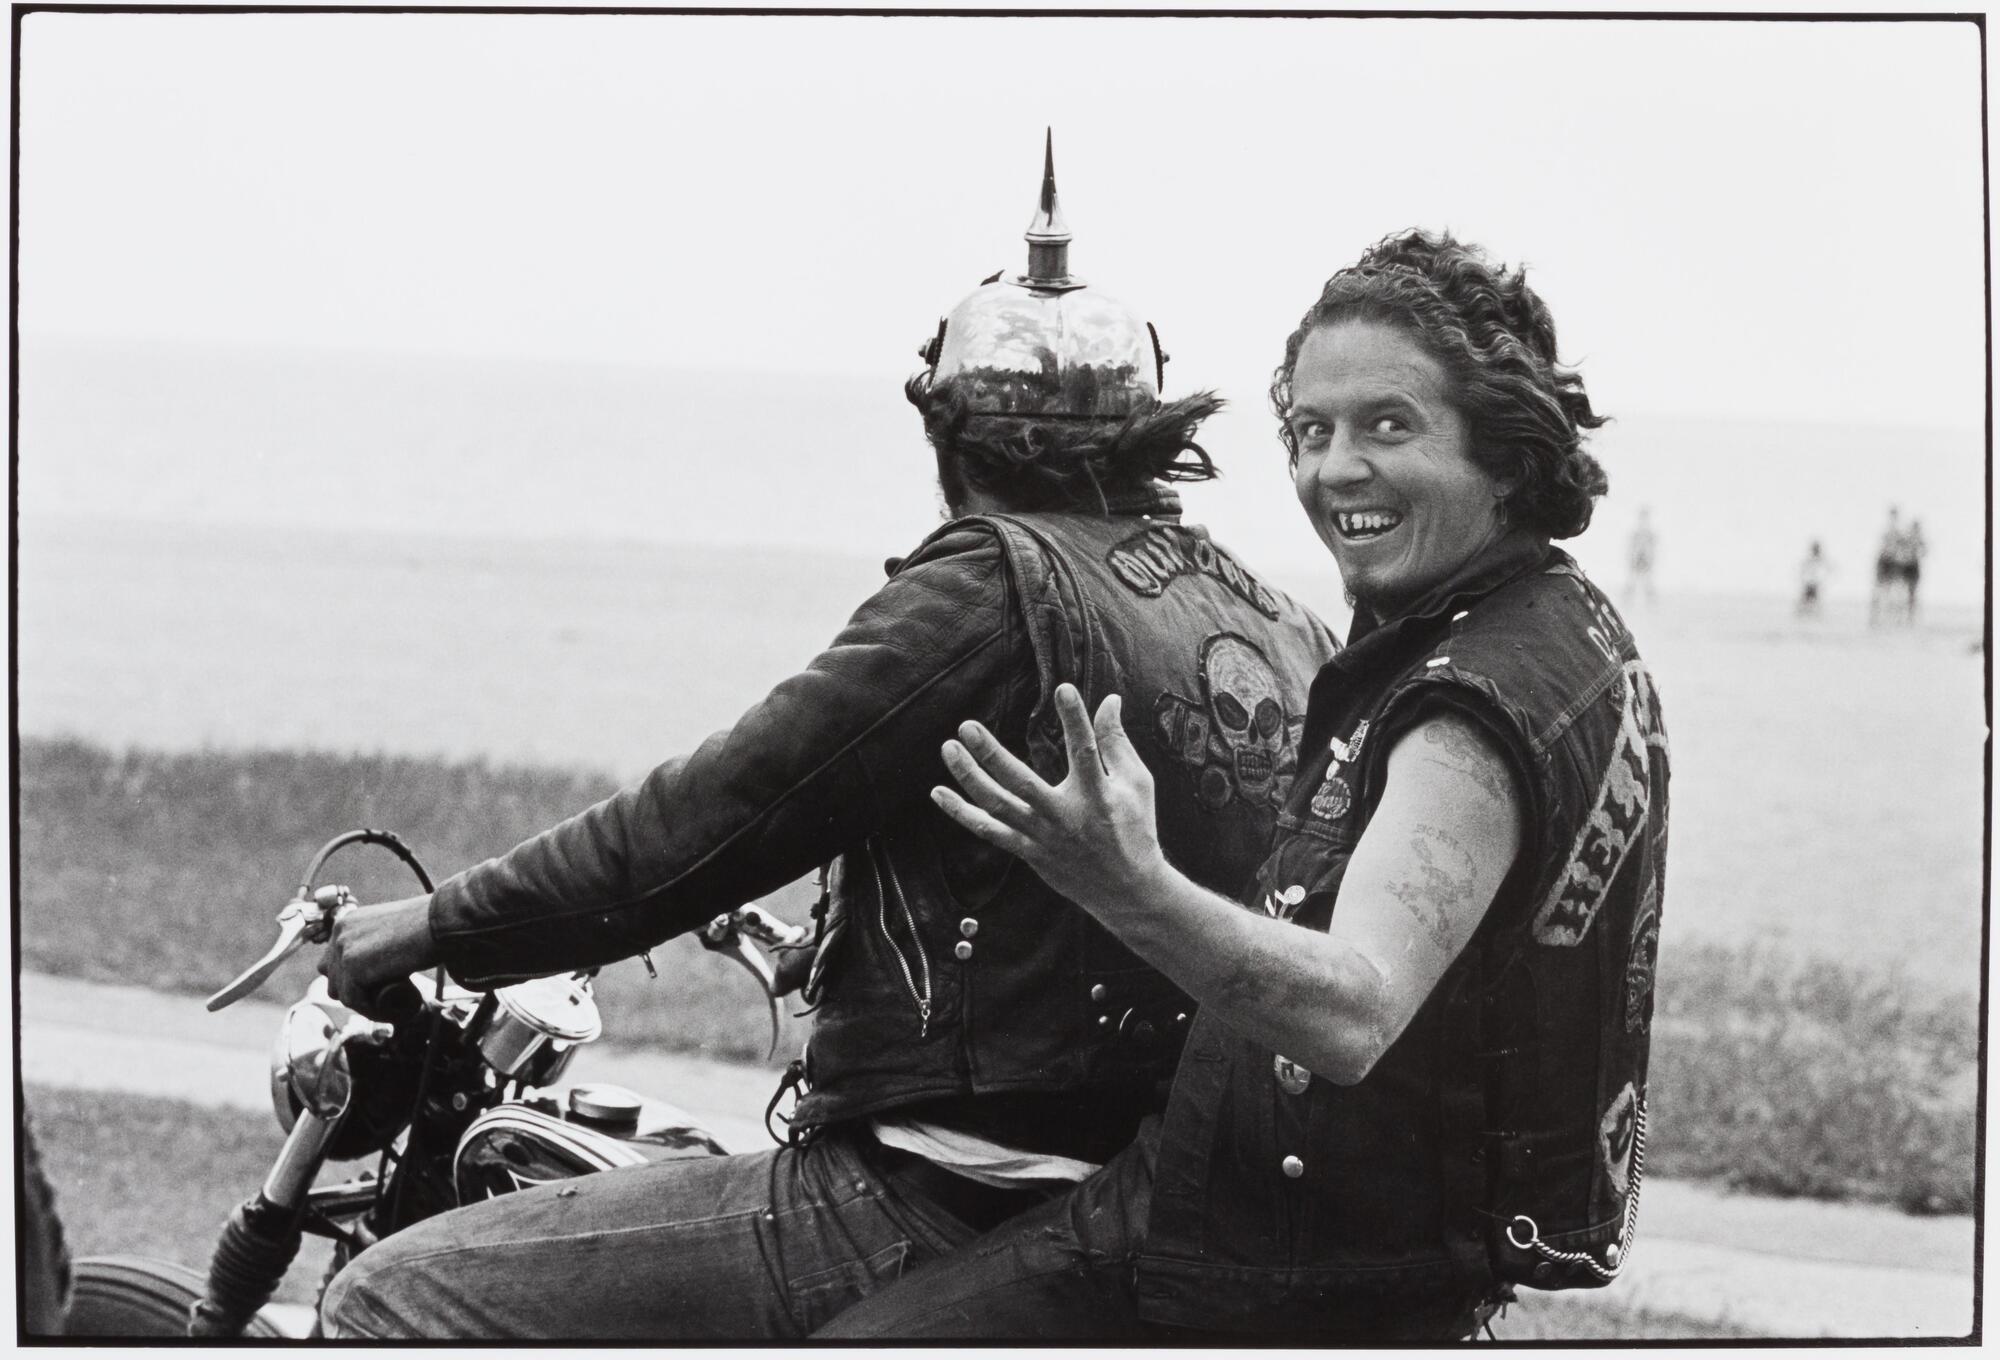 A photograph of two men riding on a motorcycle. The man in the back seat looks back at the camera, holding out his hand and smiling. The other man wears a helmet with a large spike and looks toward the beach scene that unfolds before him.